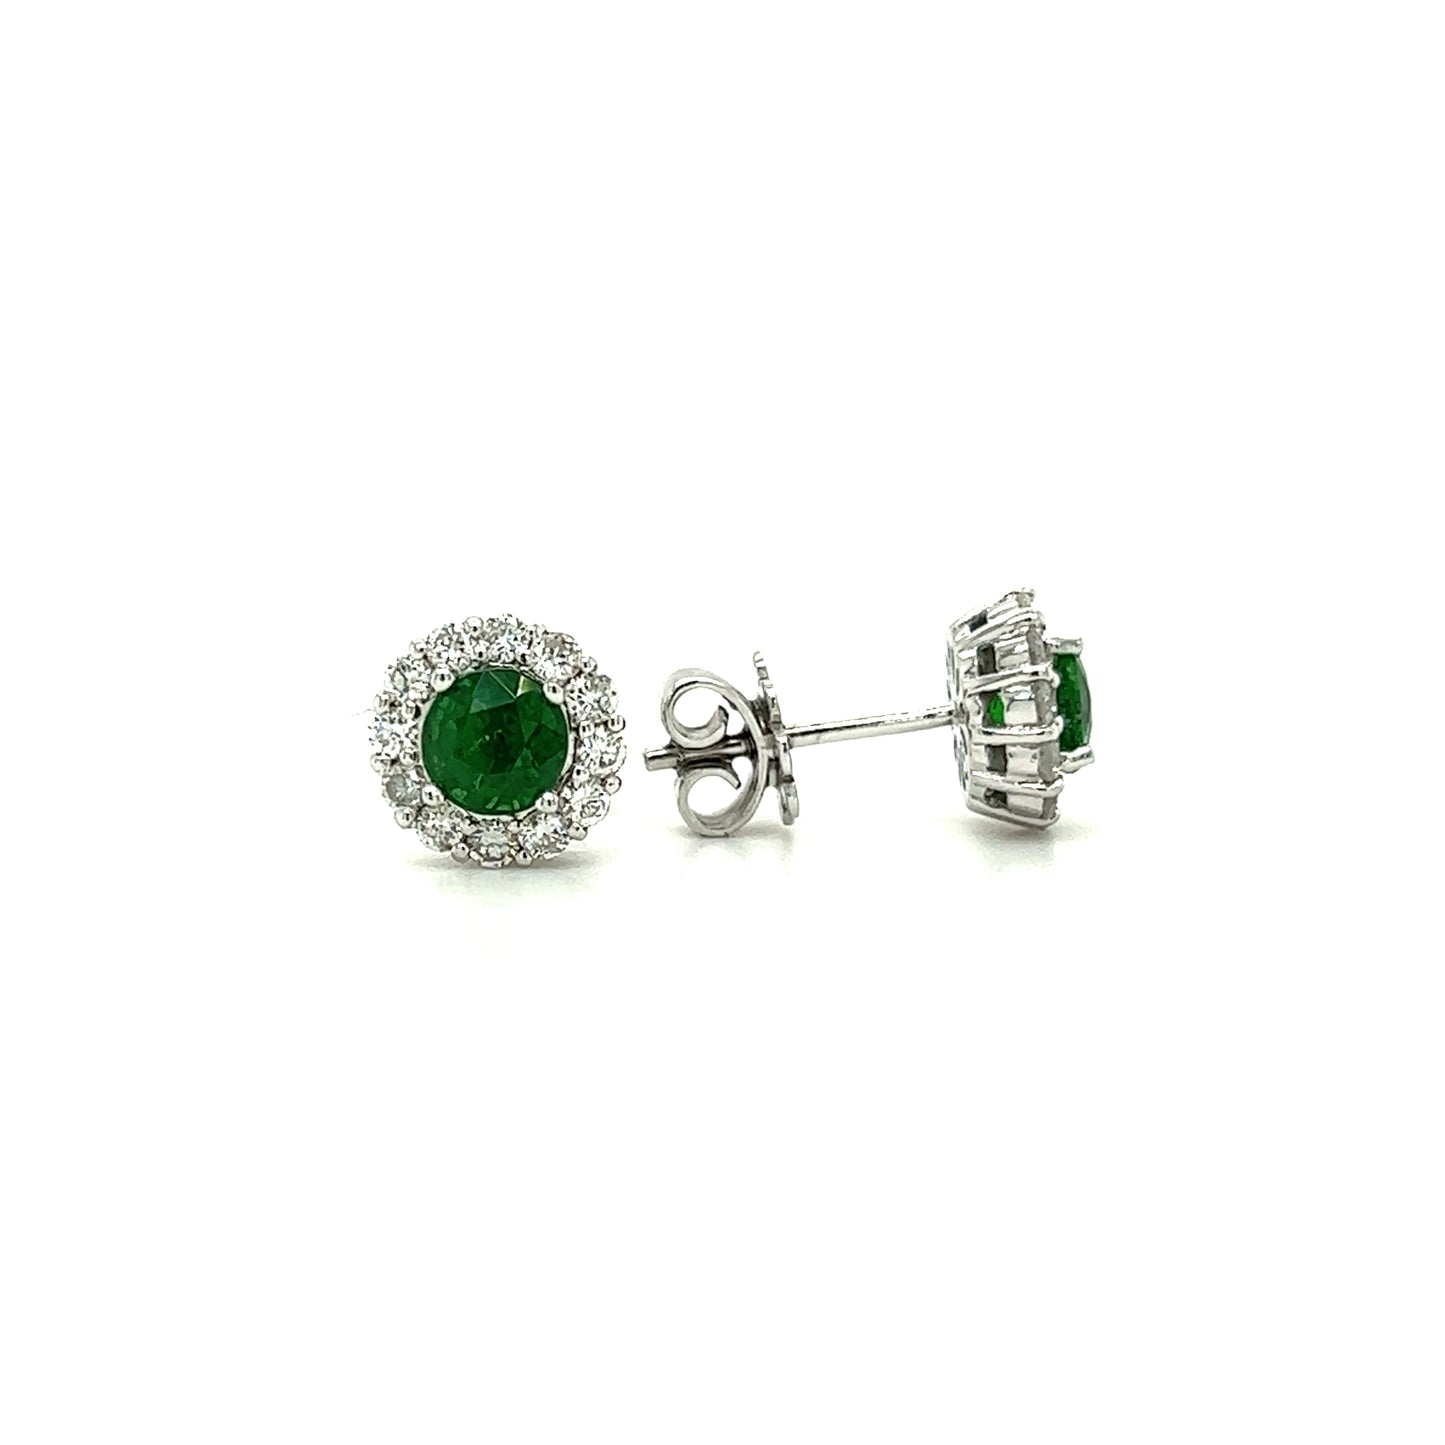 Round Tsavorite Stud Earrings with 0.56ctw of Diamonds in 14K White Gold Front and Side View